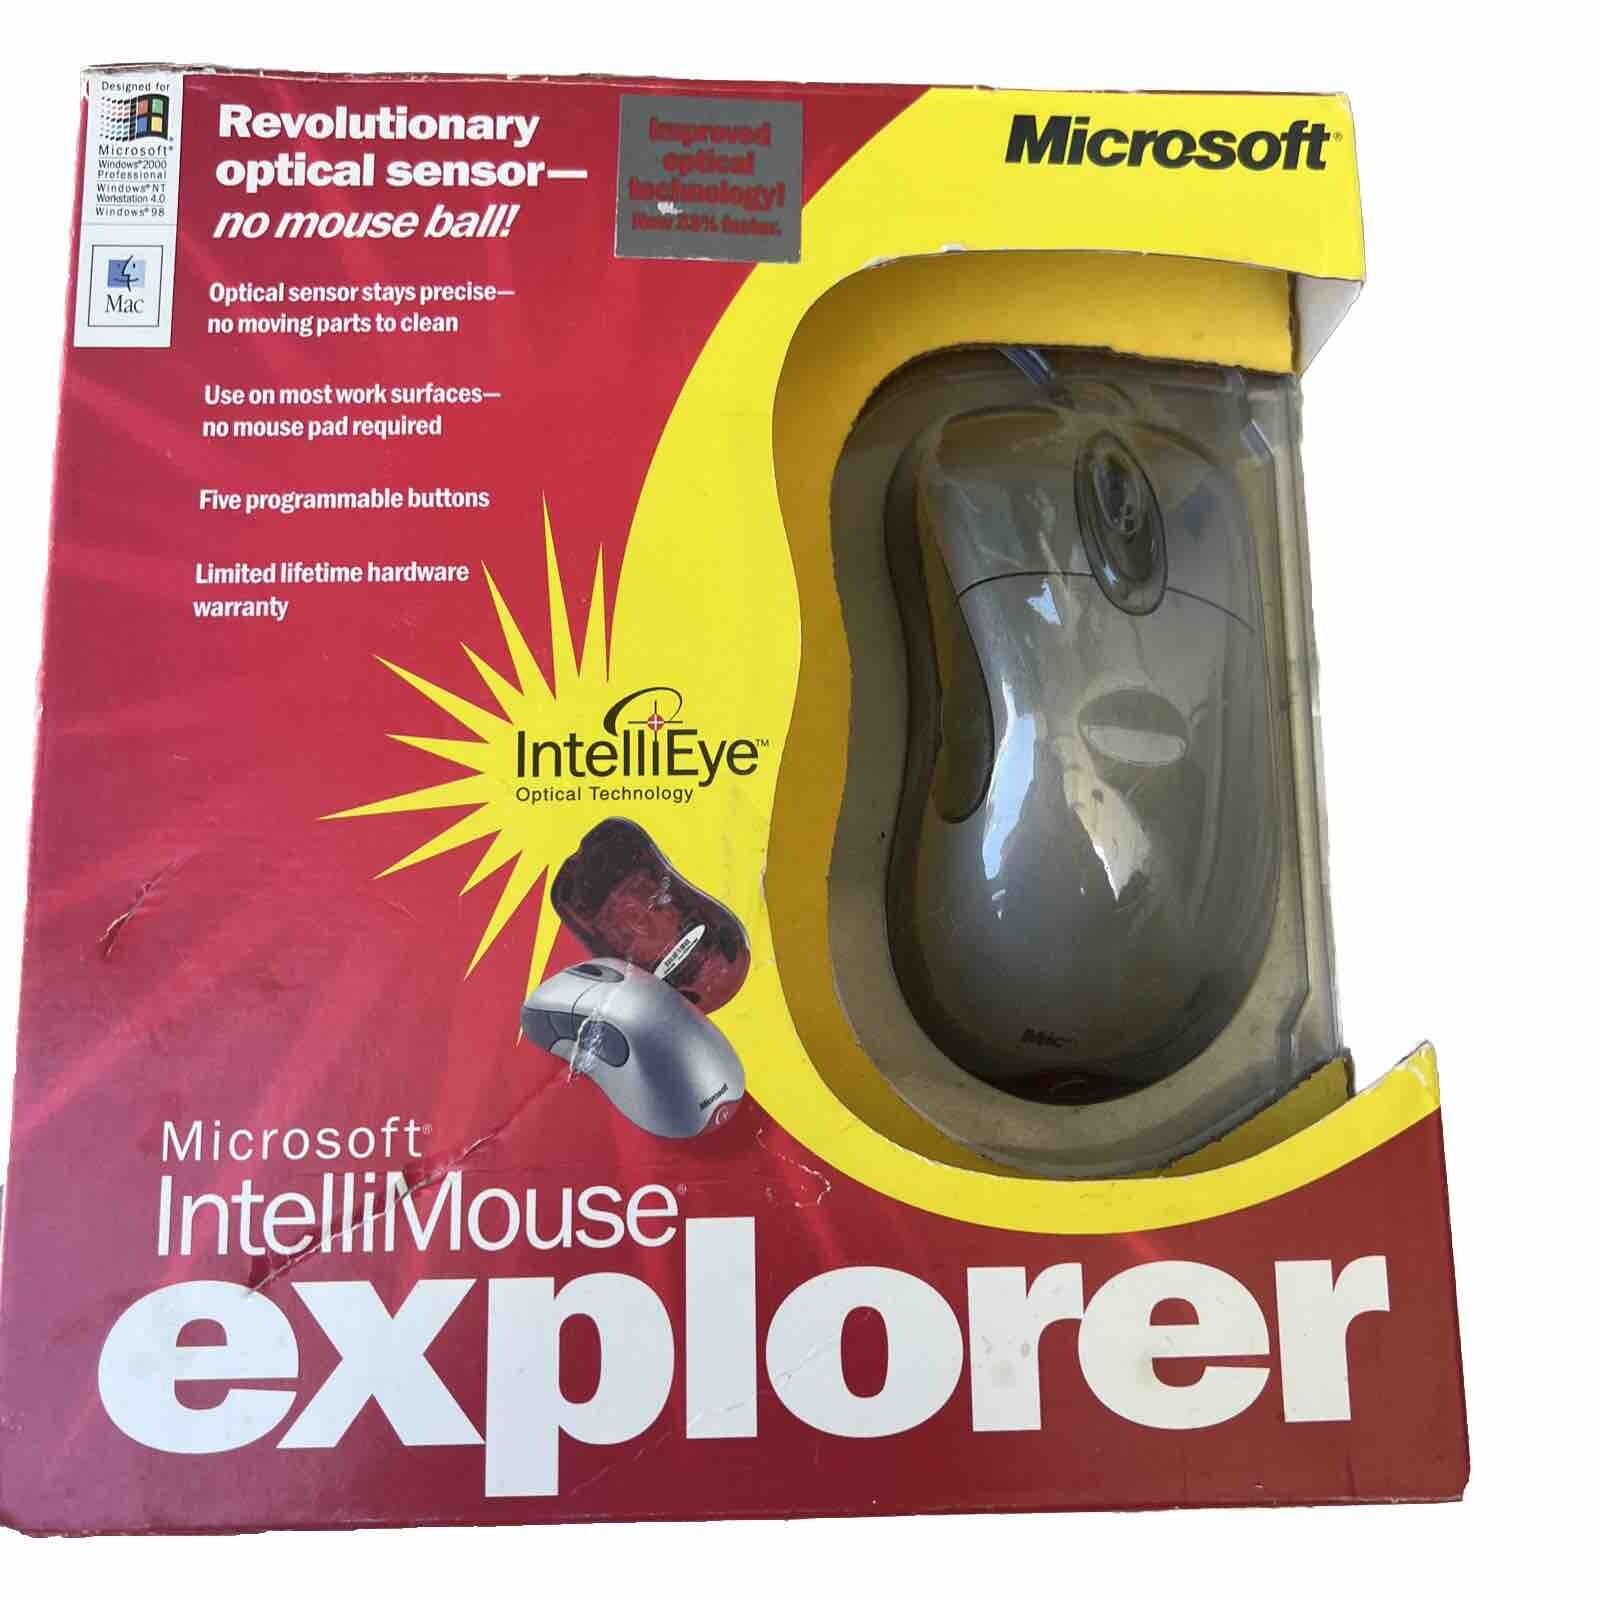 NEW VINTAGE 2000 MICROSOFT INTELLIMOUSE EXPLORER 3.0 OPTICAL TECHNOLOGY MOUSE